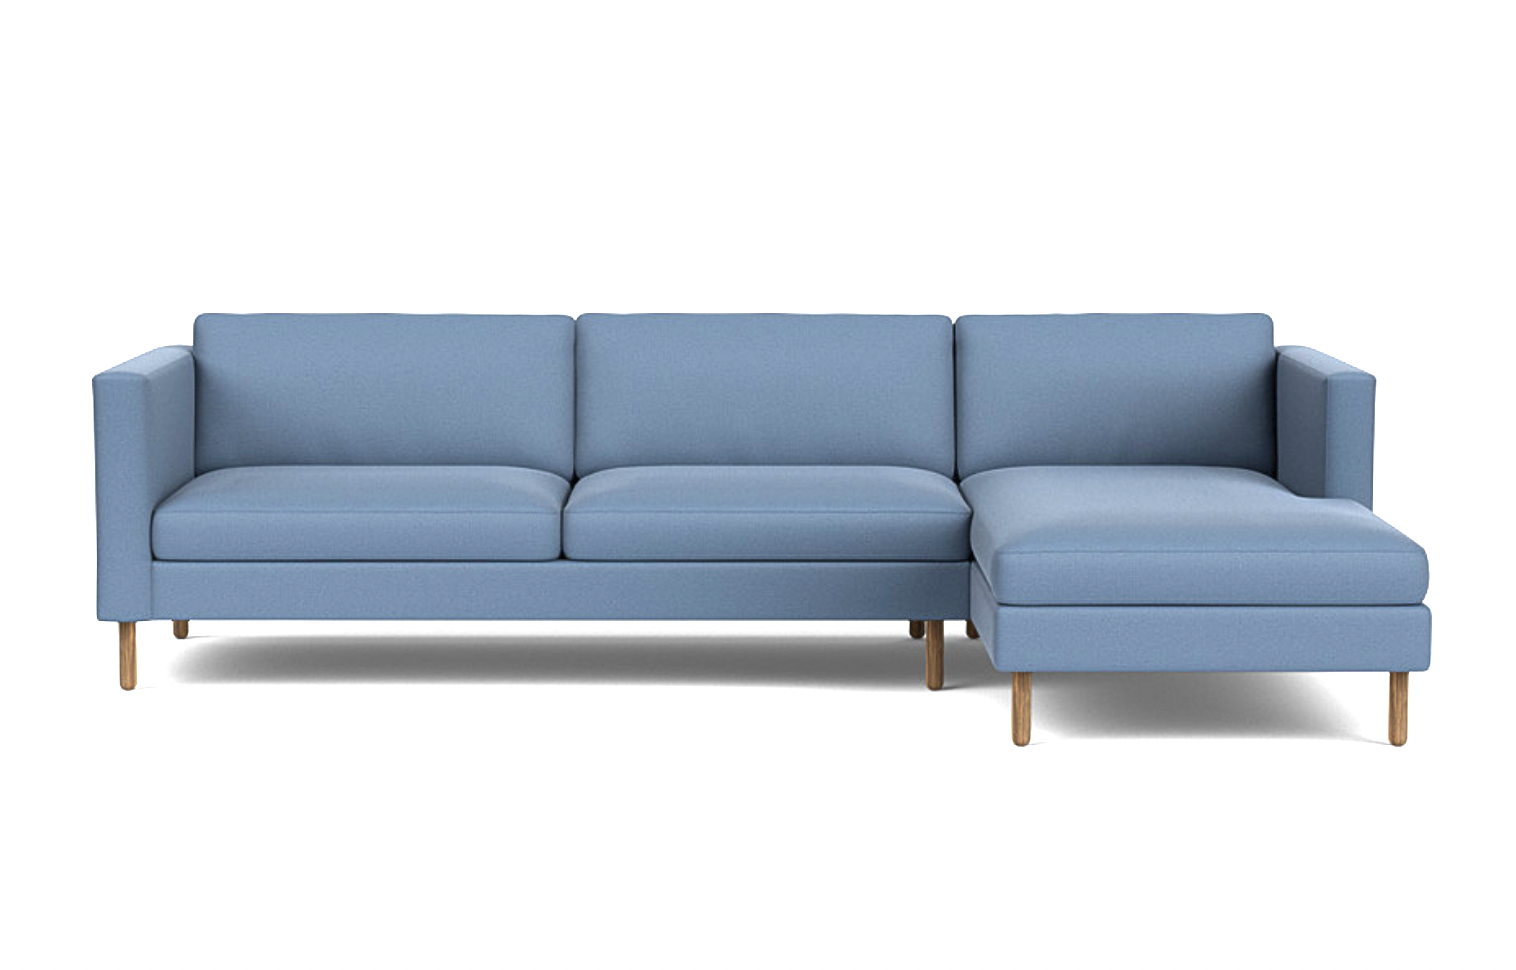 Mota Chaise Sectional